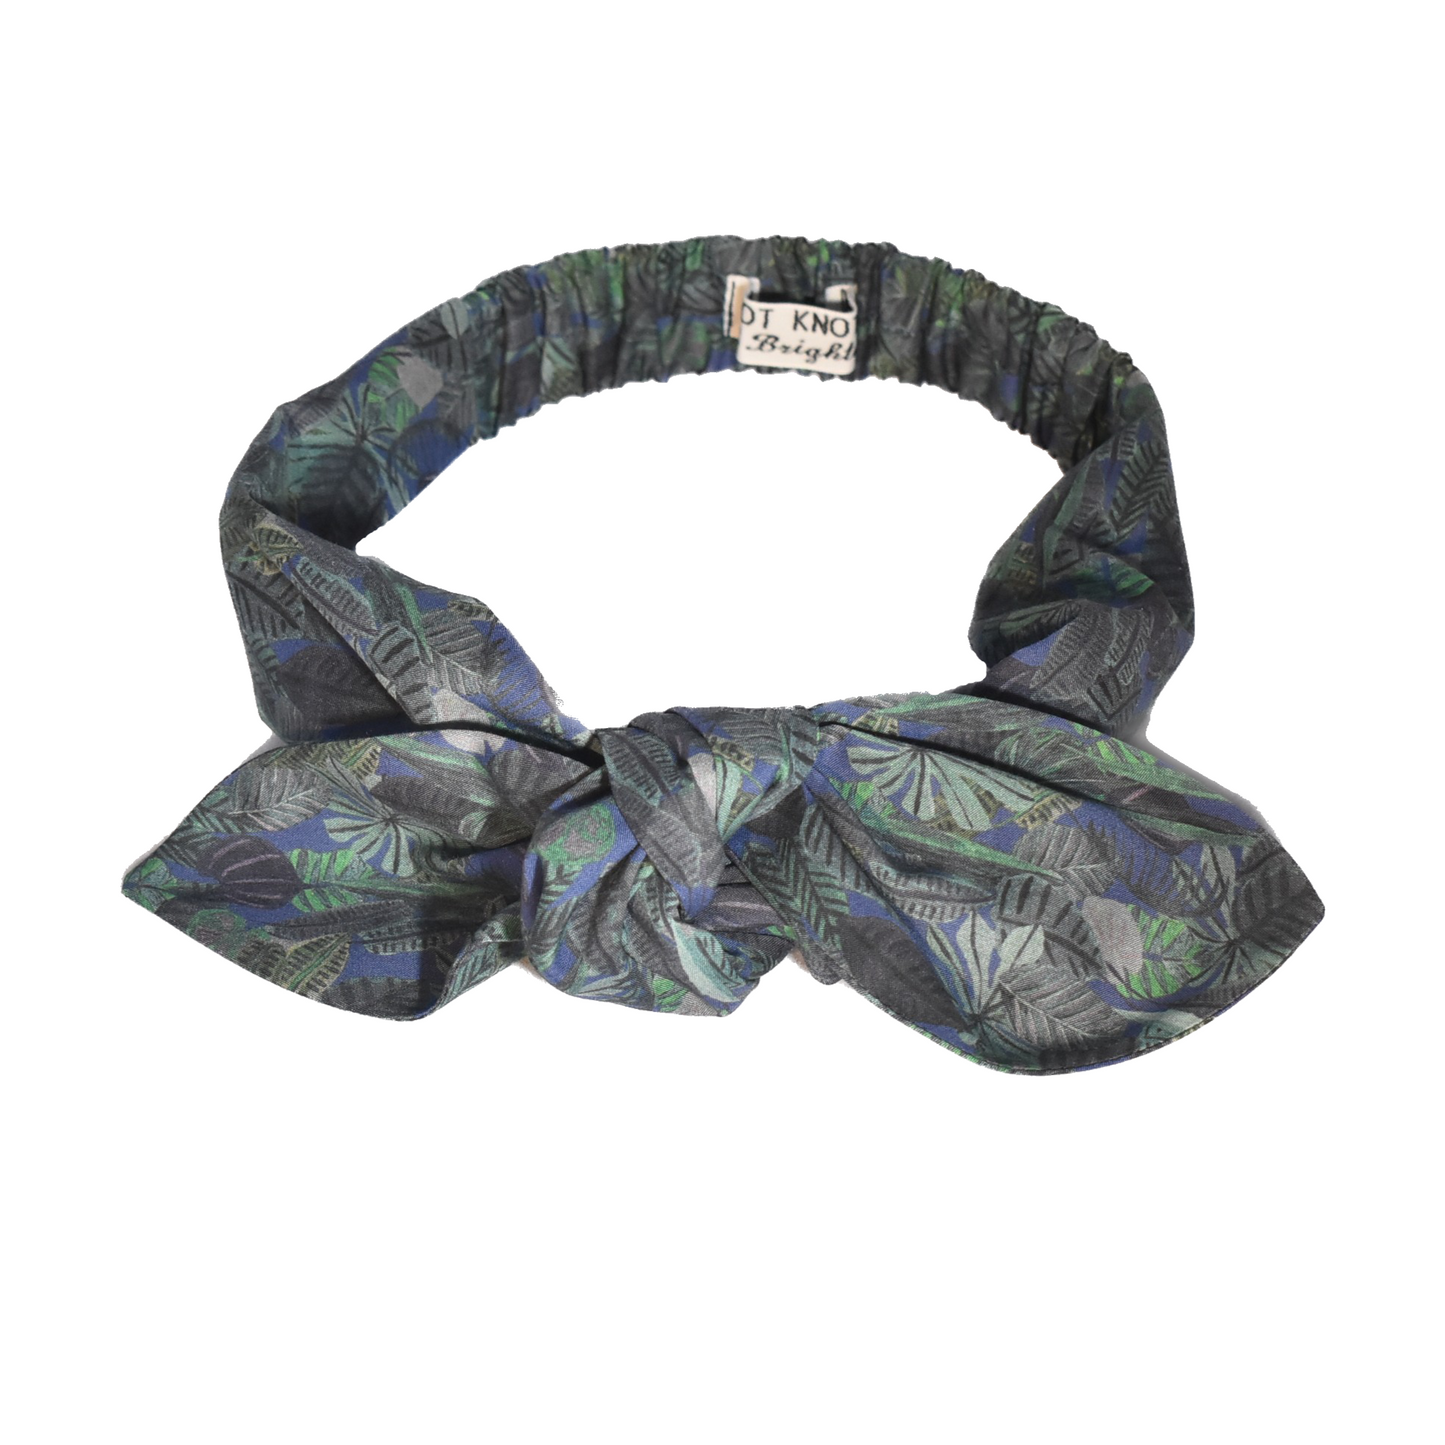 Ladies Knot Tie hairband - Liberty of London Chaparrel - Navy and Green Fern Print